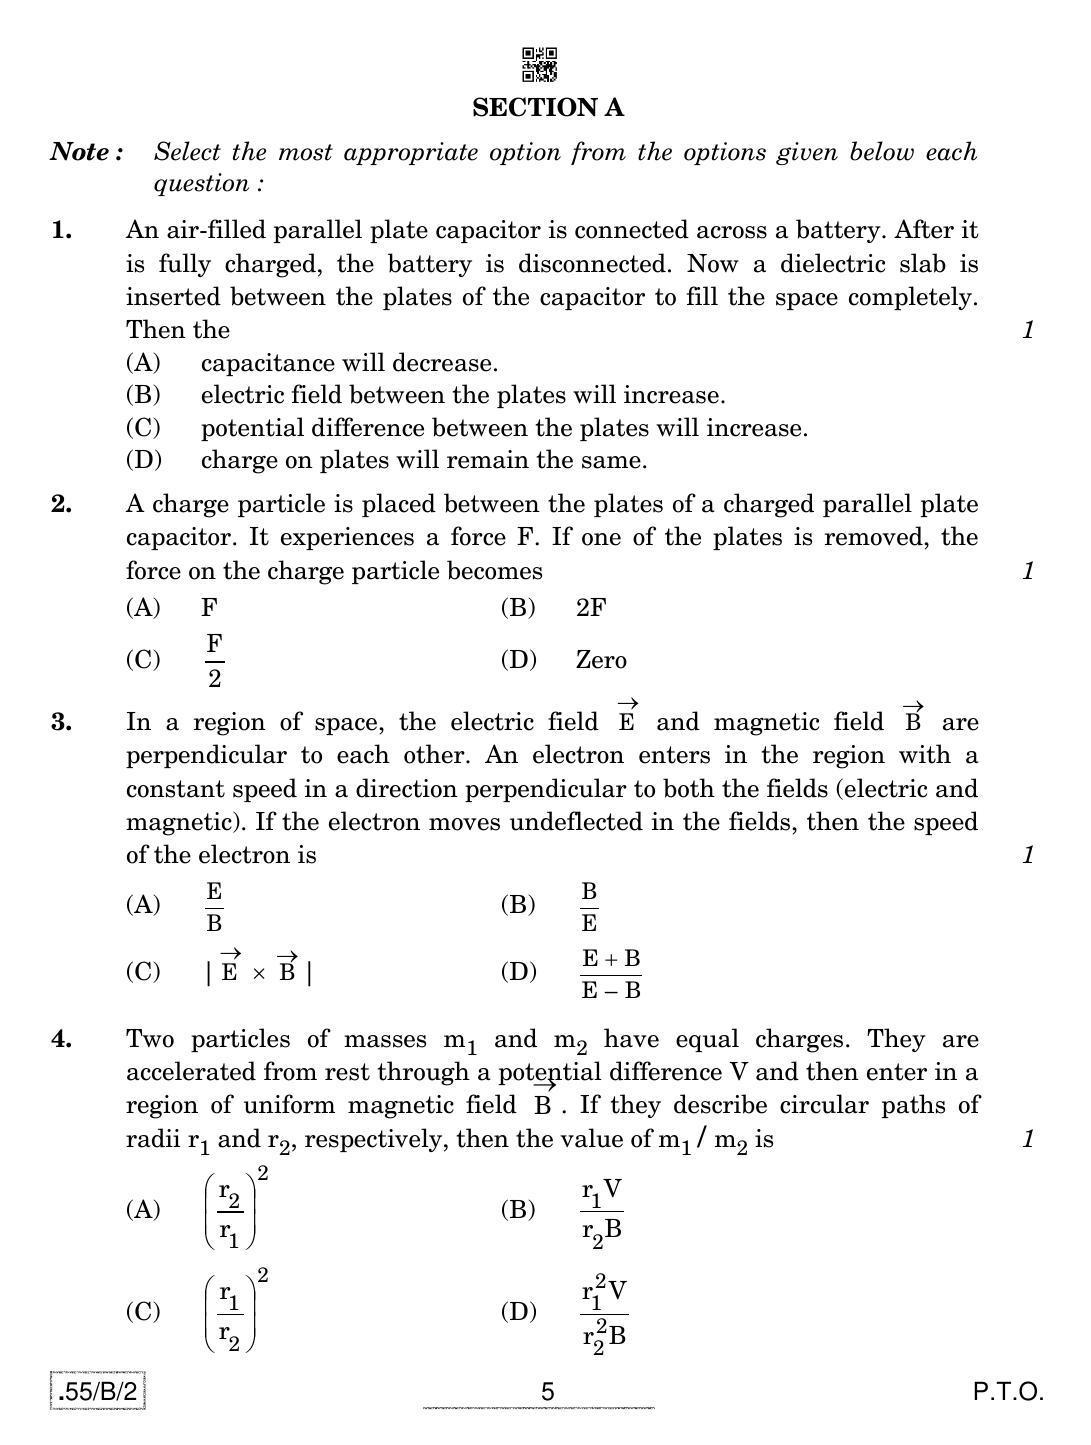 CBSE Class 12 55-C-2 - Physics 2020 Compartment Question Paper - Page 5